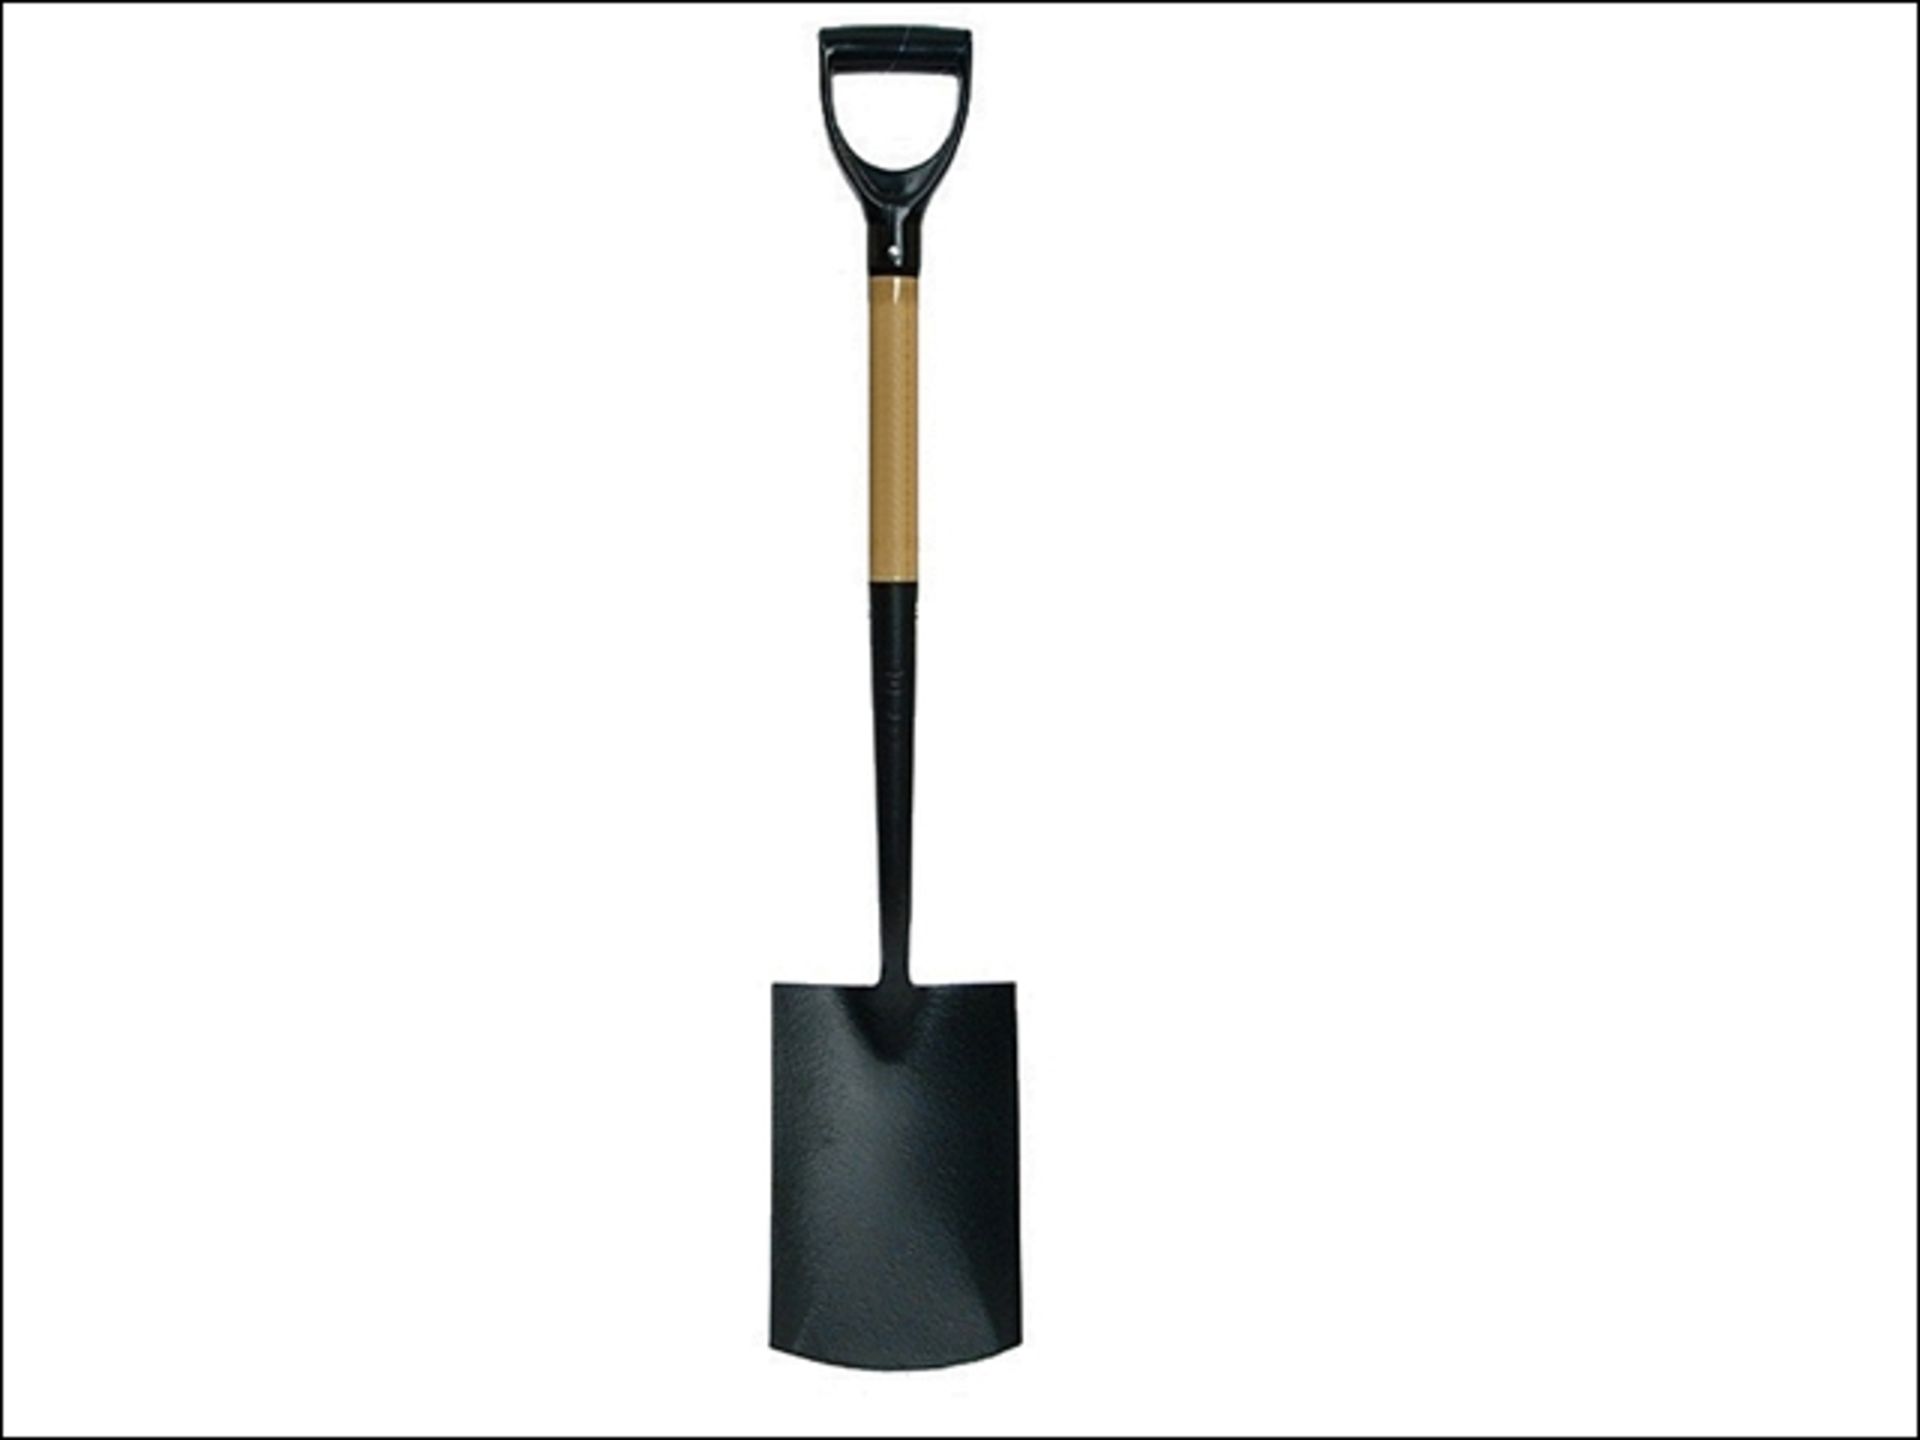 V *TRADE QTY* Brand New Carbon Steel Open Socket Spade With PYD Handle X 4 YOUR BID PRICE TO BE